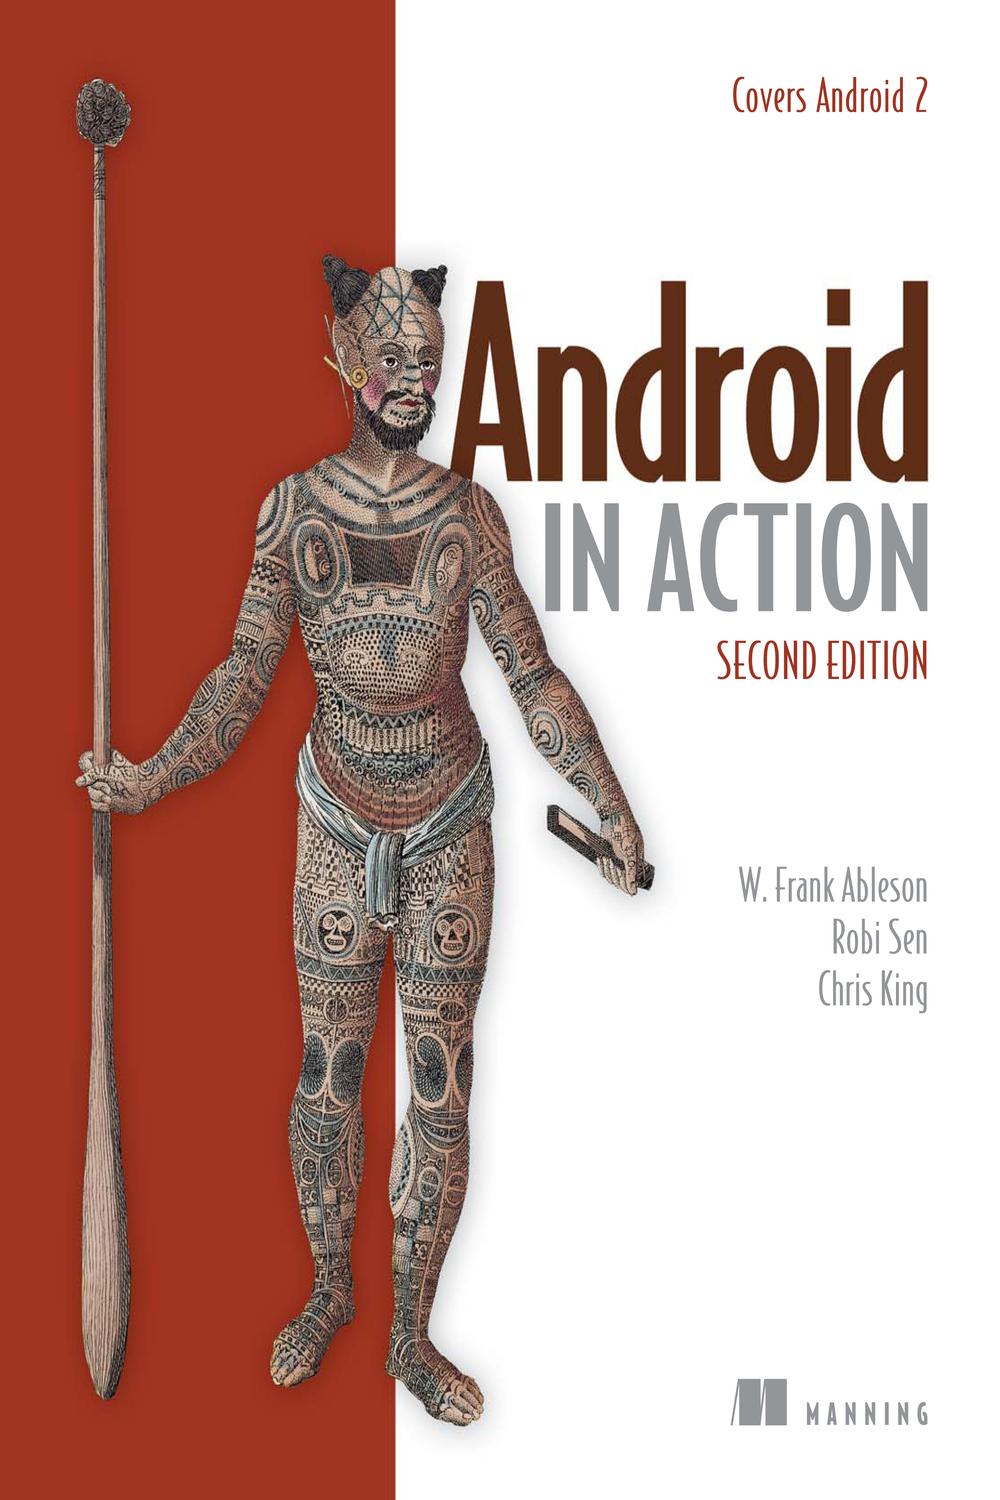 Android in Action, Second Edition - Robi Sen, Frank Ableson